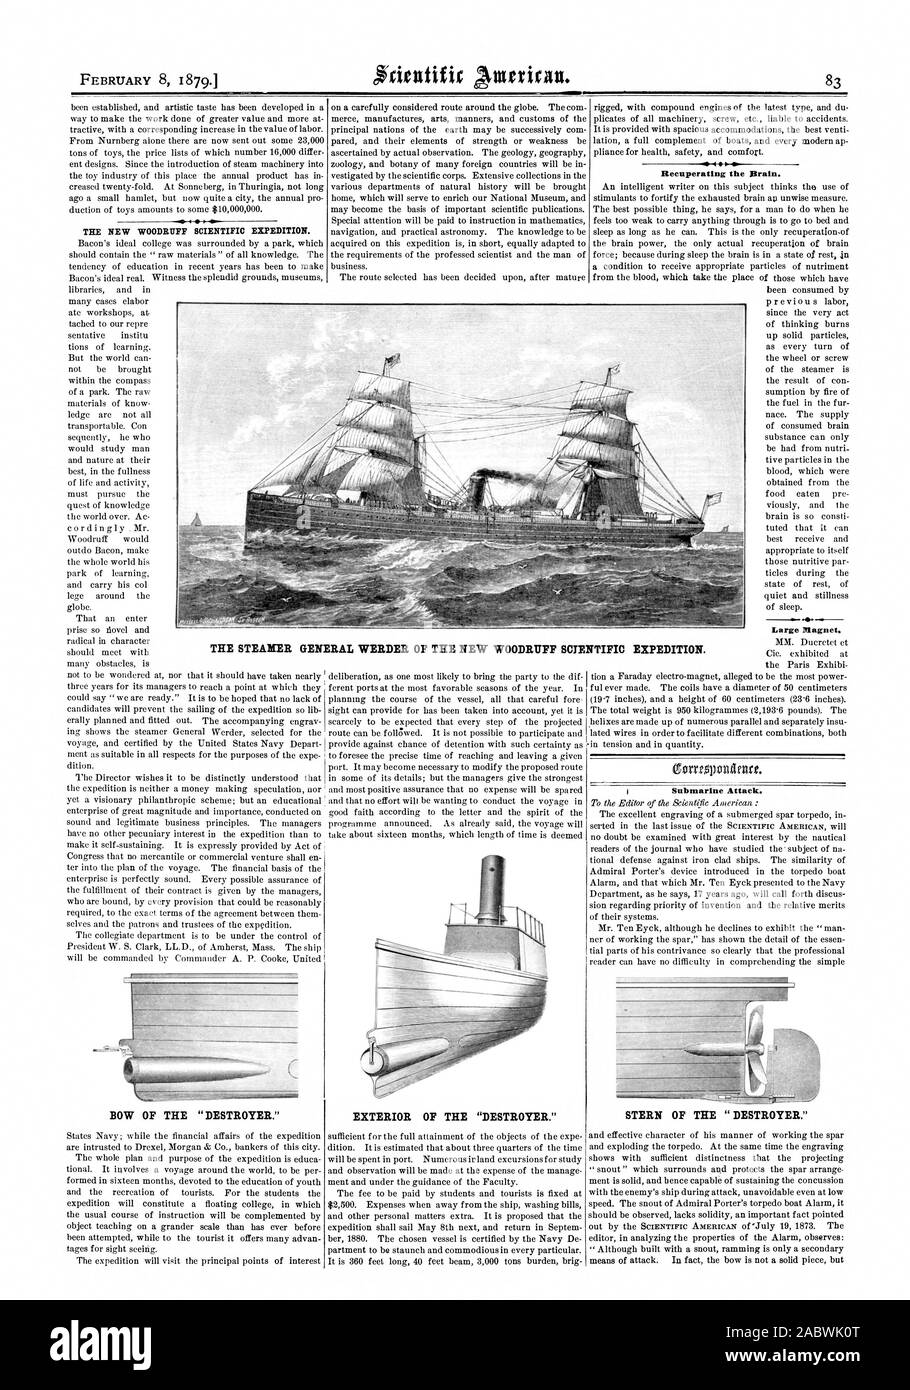 FEBRUARY 8 1879. Recuperating the Brain. Large Magnet. Submarine Attack. THE STEAMER GENERAL WEEDER OF THE NEW WOODRUFF SCIENTIFIC EXPEDITION. BOW OF THE 'DESTROYER.' EXTERIOR OF THE 'DESTROYER.' STERN OF THE 'DESTROYER., scientific american, 1879-02-08 Stock Photo